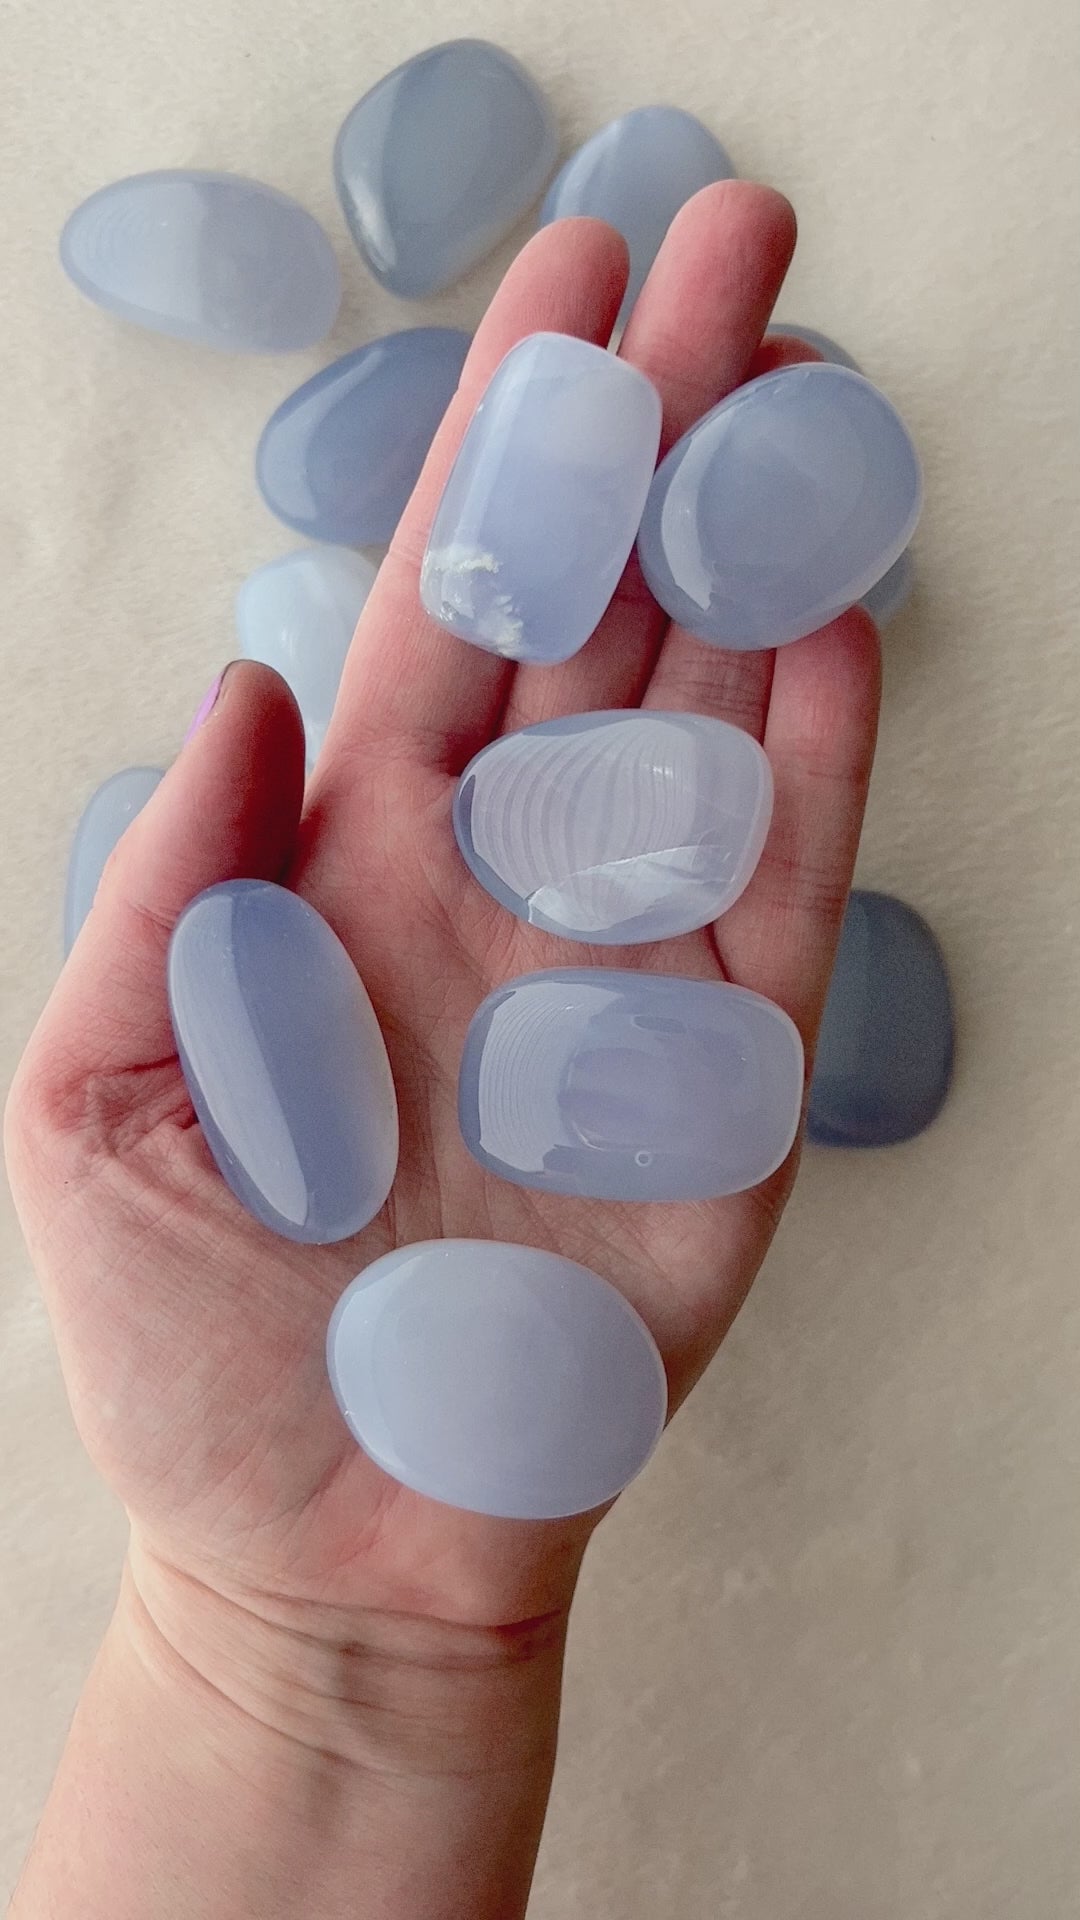 Blue Chalcedony Tumble // Self-Reflection + Open Your Heart